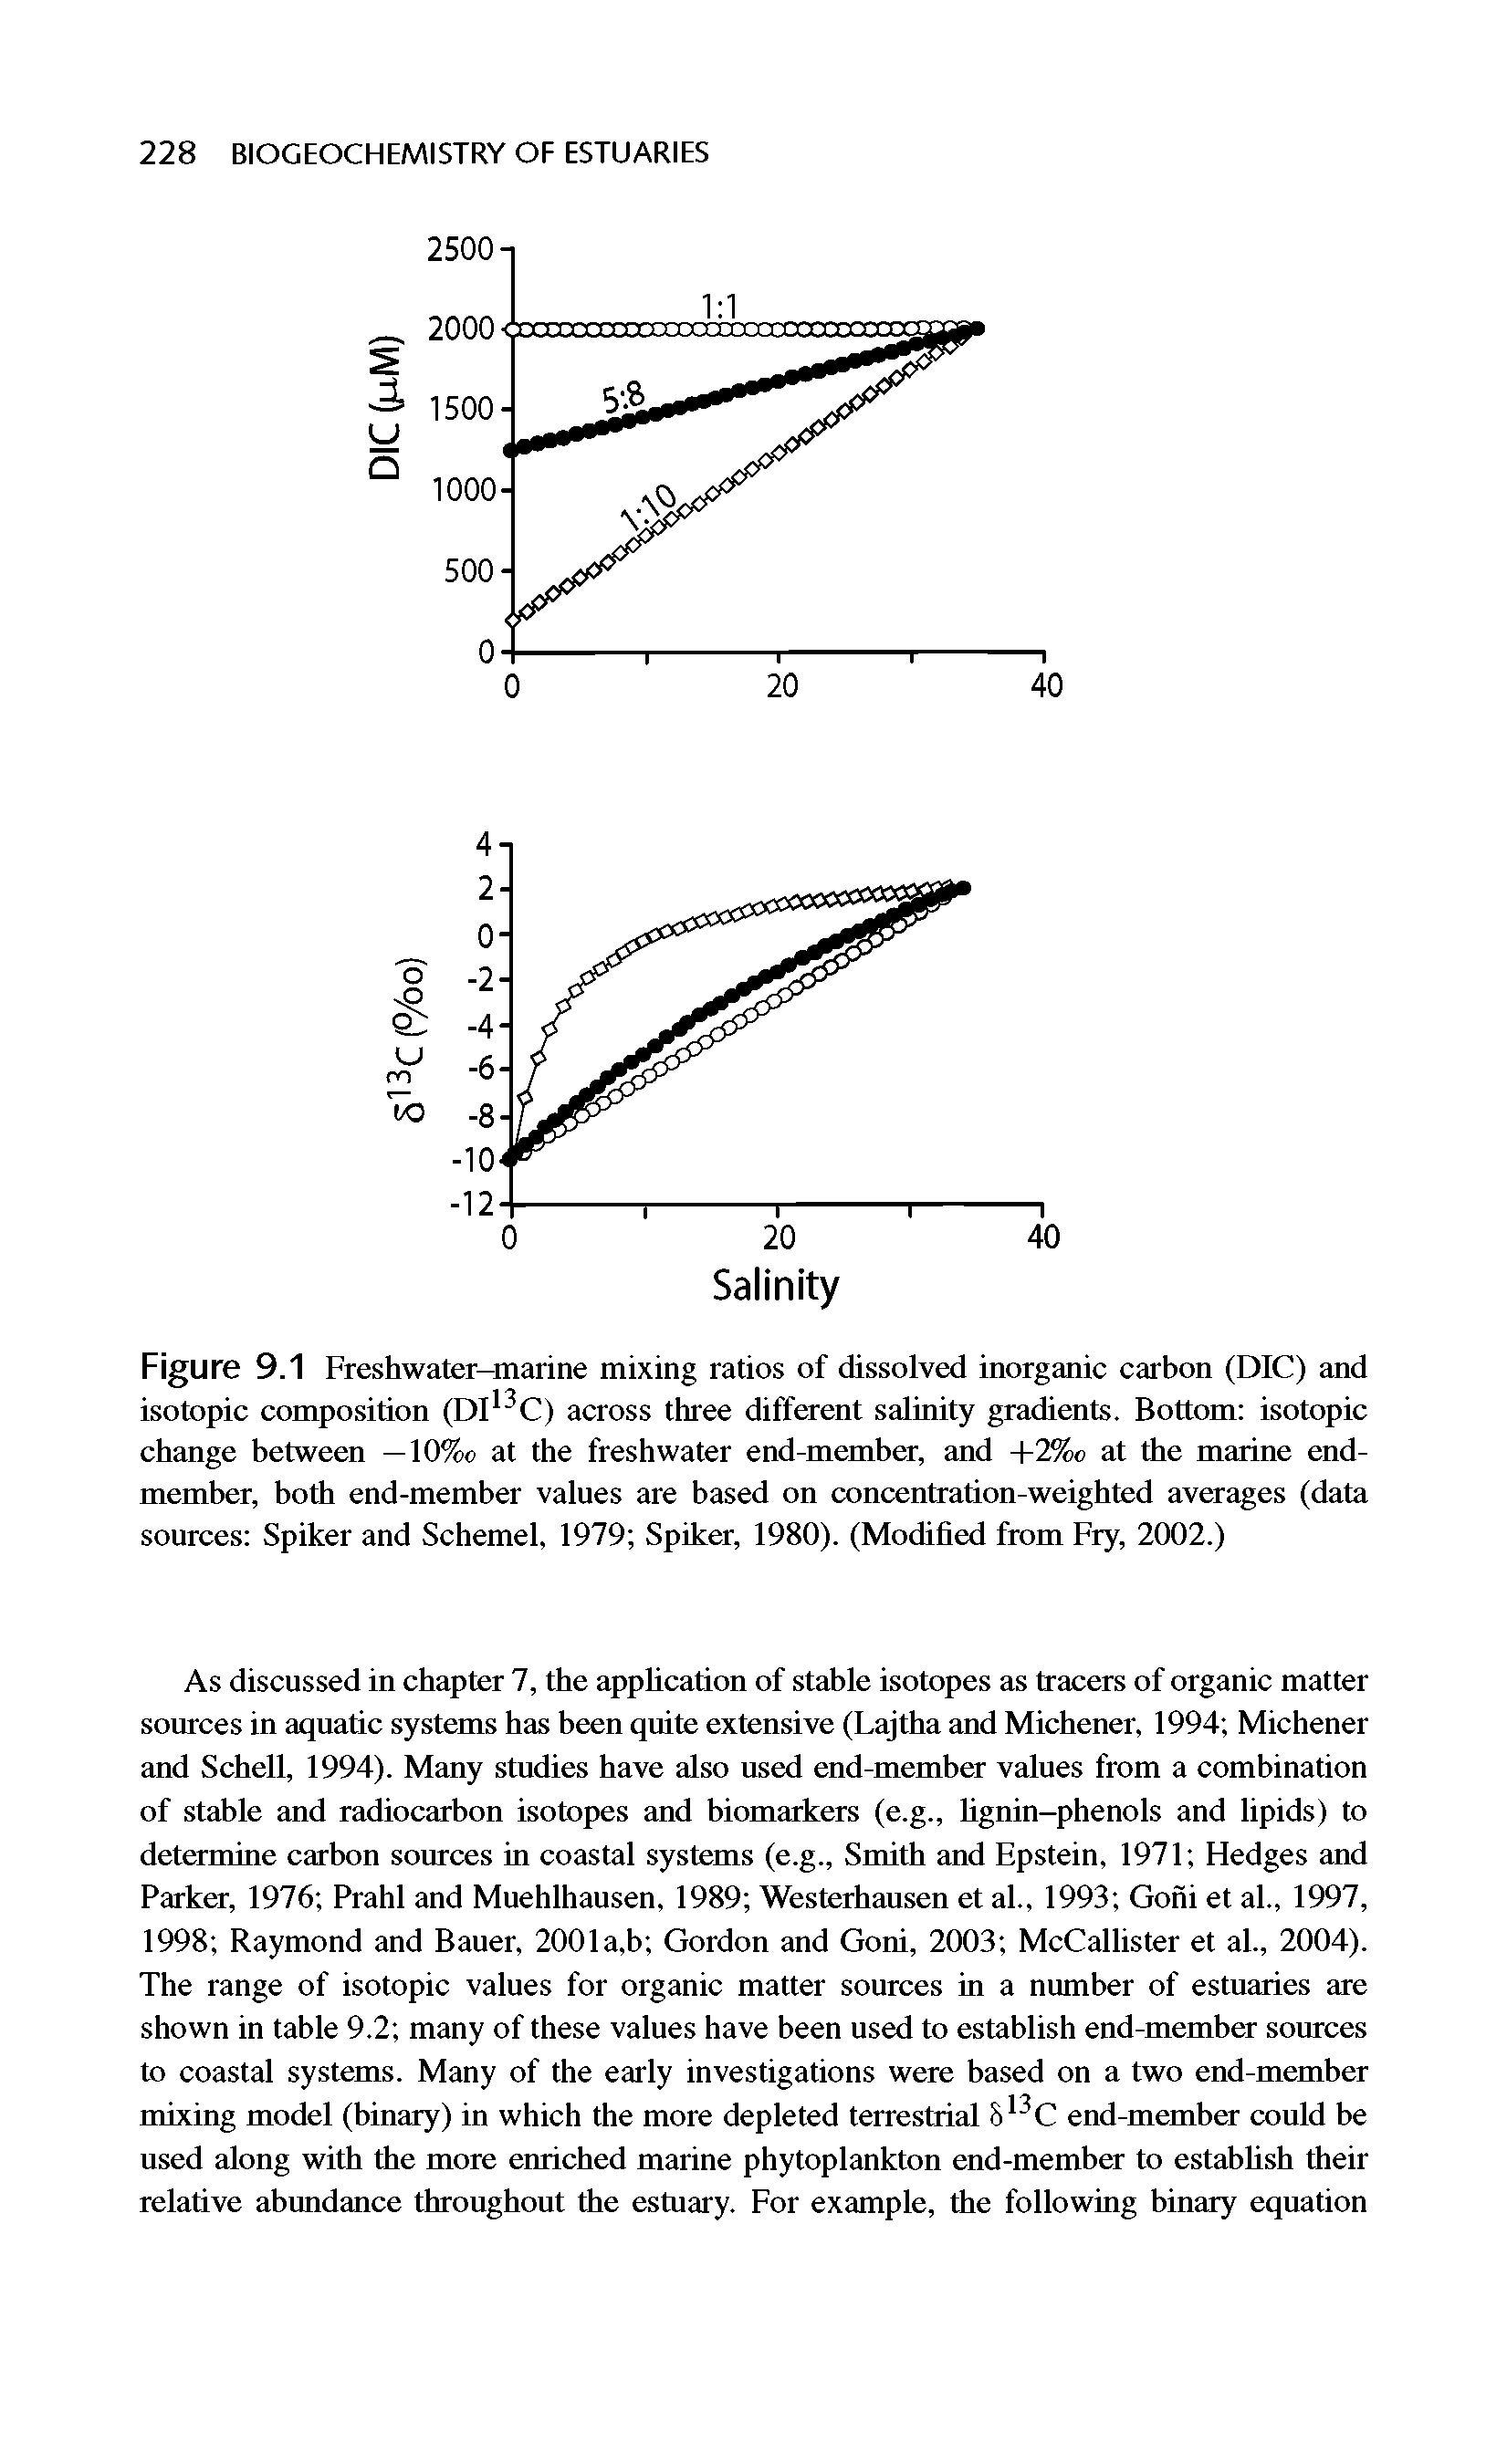 Figure 9.1 Freshwater-marine mixing ratios of dissolved inorganic carbon (DIC) and isotopic composition (DI13C) across three different salinity gradients. Bottom isotopic change between — 10%e at the freshwater end-member, and +2%c at the marine end-member, both end-member values are based on concentration-weighted averages (data sources Spiker and Schemel, 1979 Spiker, 1980). (Modified from Fry, 2002.)...